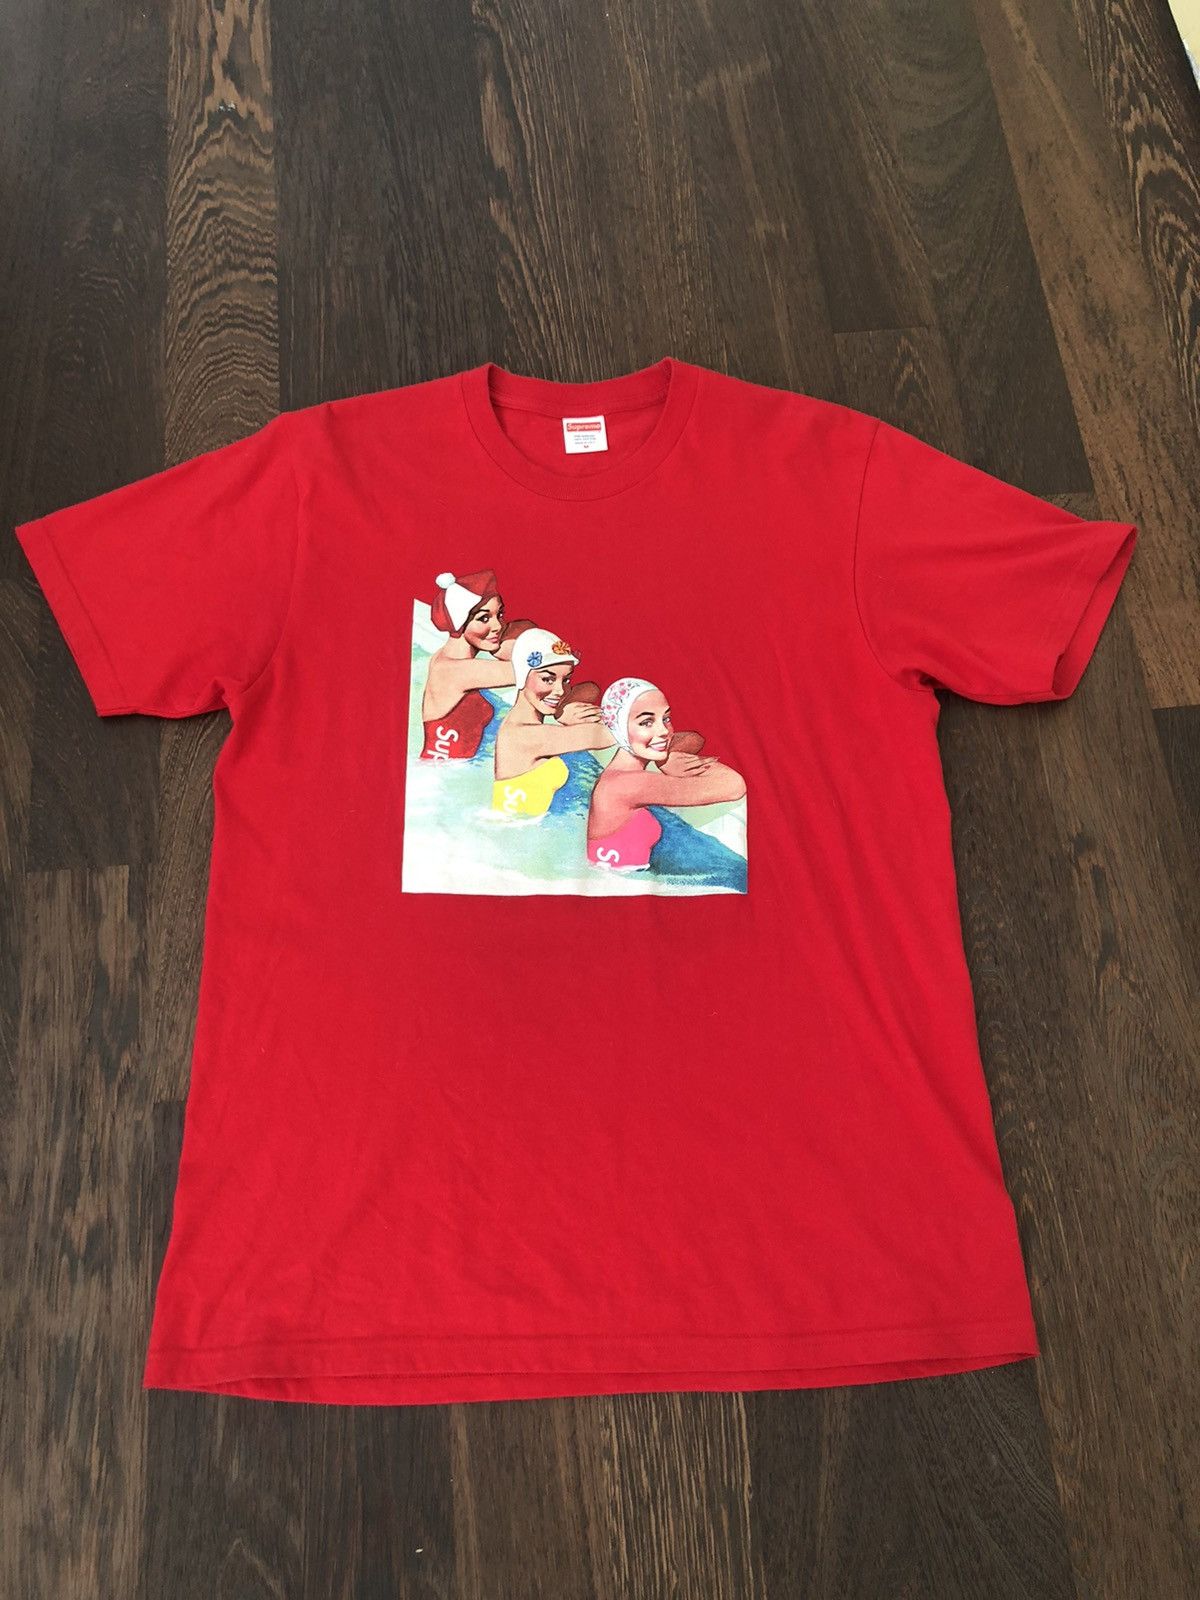 Supreme Supreme Swimmers Tee Red SS18 | Grailed